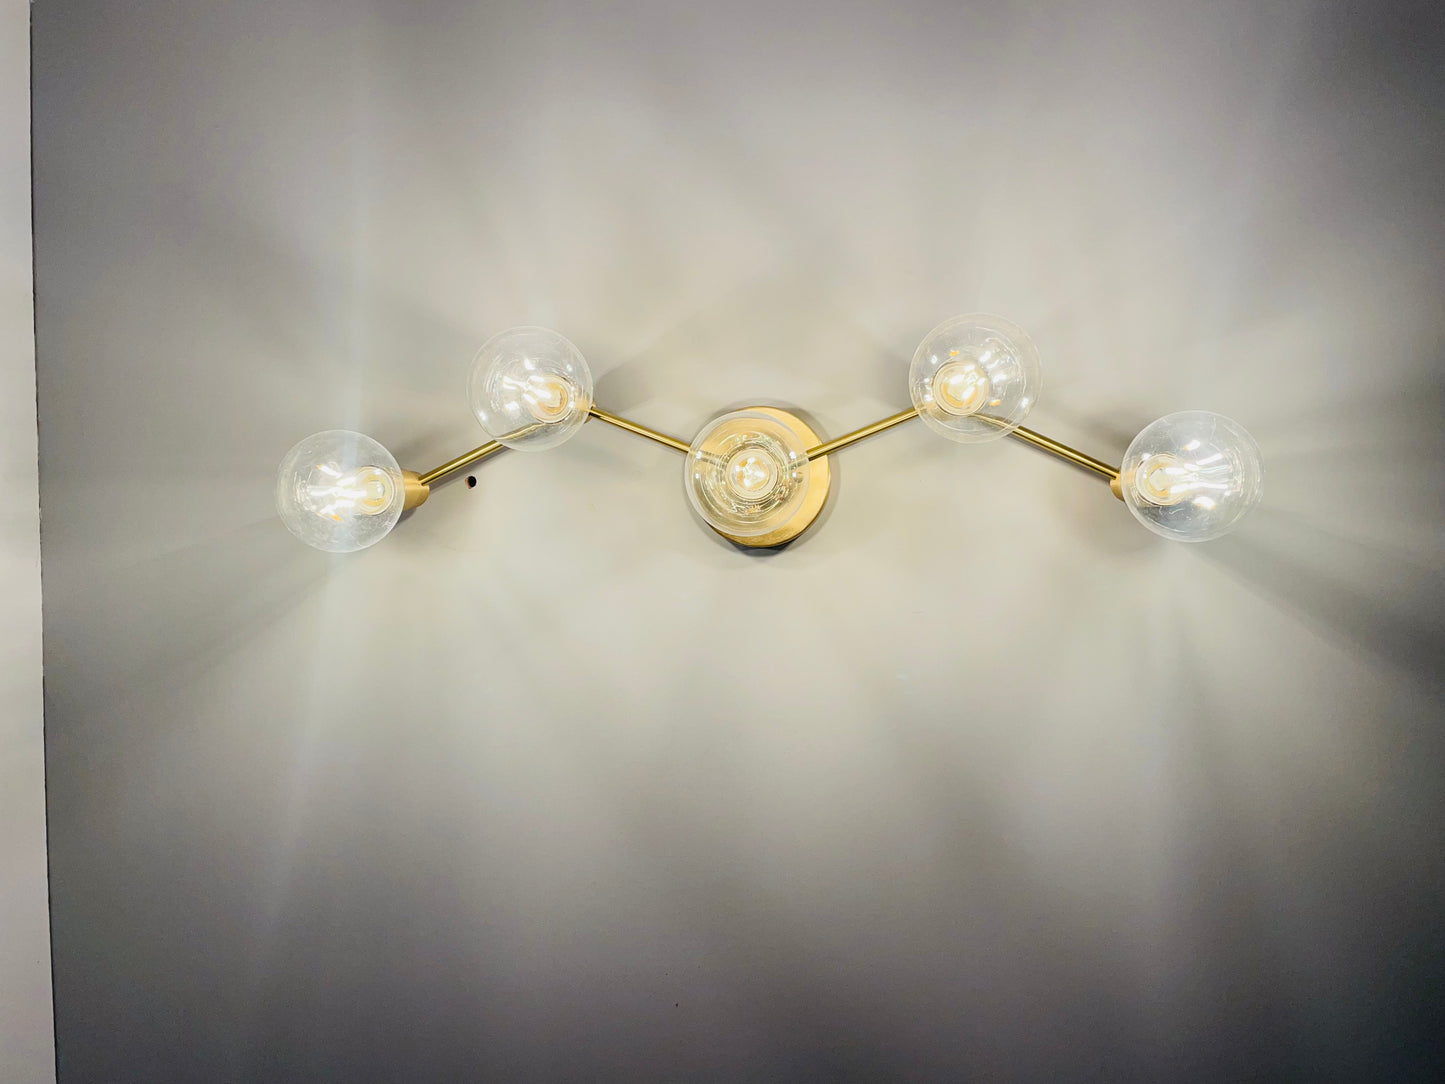 Illuminate Your Space with Stylish Brass Wall Light Fixture